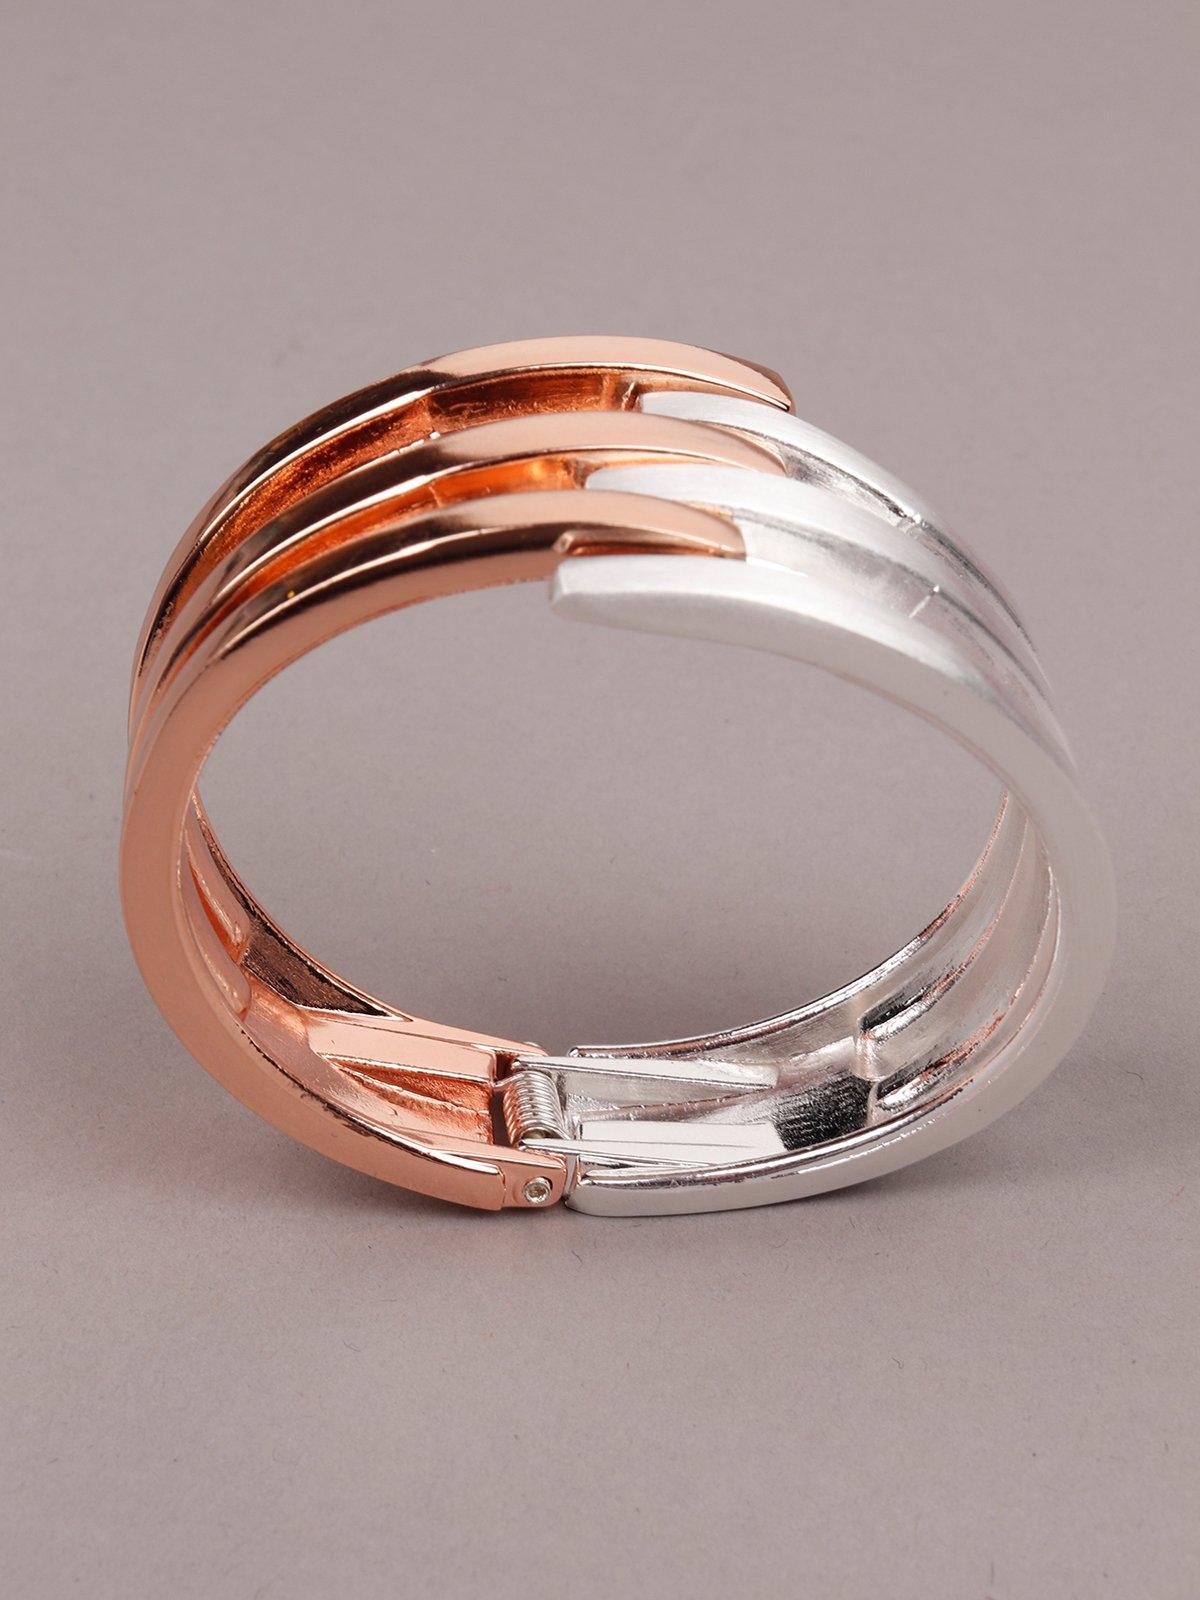 Women's Dual Coloured Rose Gold And Stunning Silver Bracelet - Odette